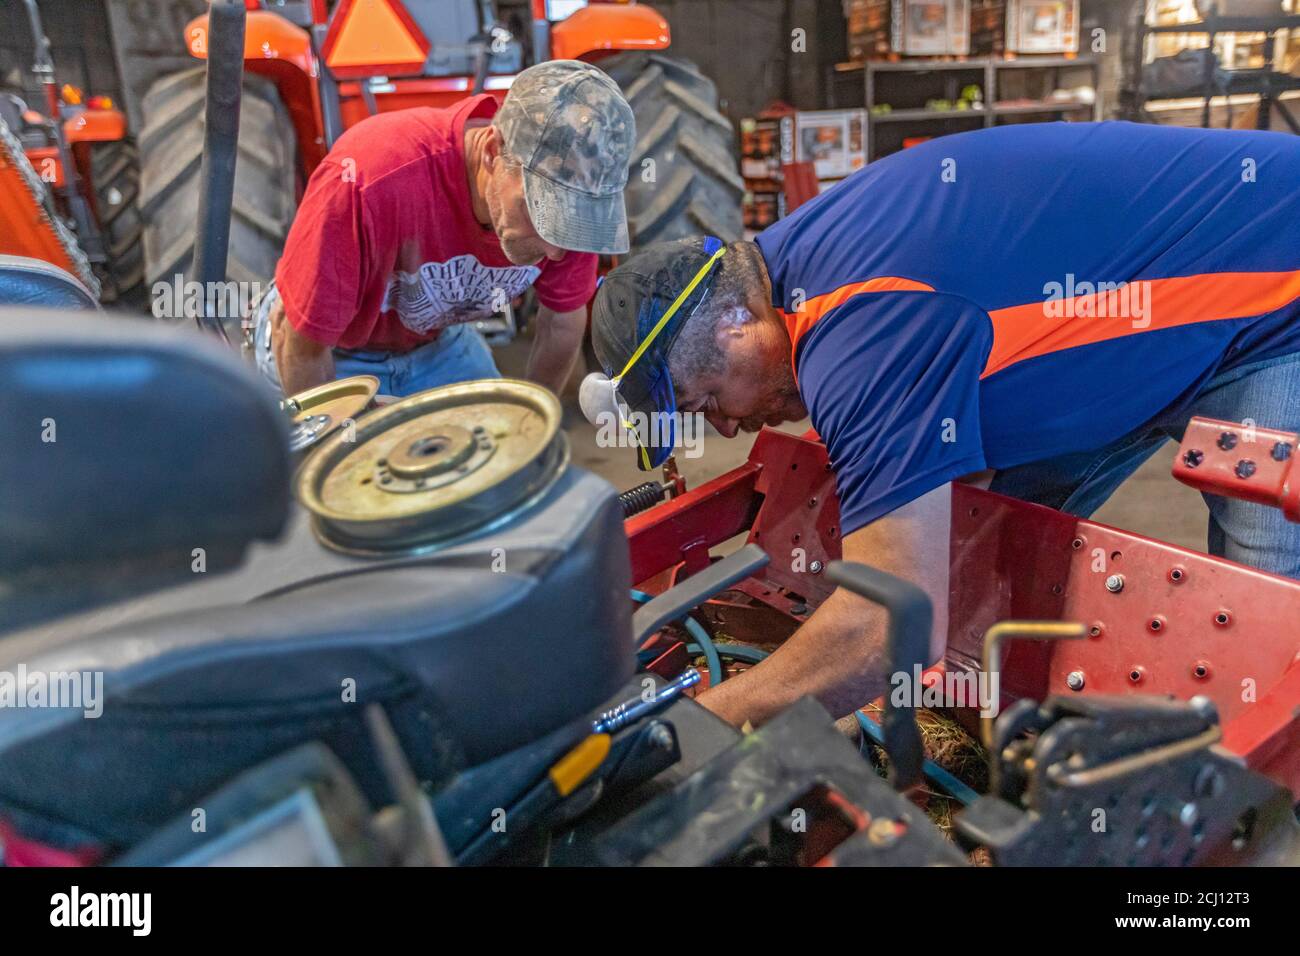 Detroit, Michigan - Mechanics at Detroit Grounds Crew repair mowing equipment that the company uses to mow lawns in parks, schools, and vacant propert Stock Photo